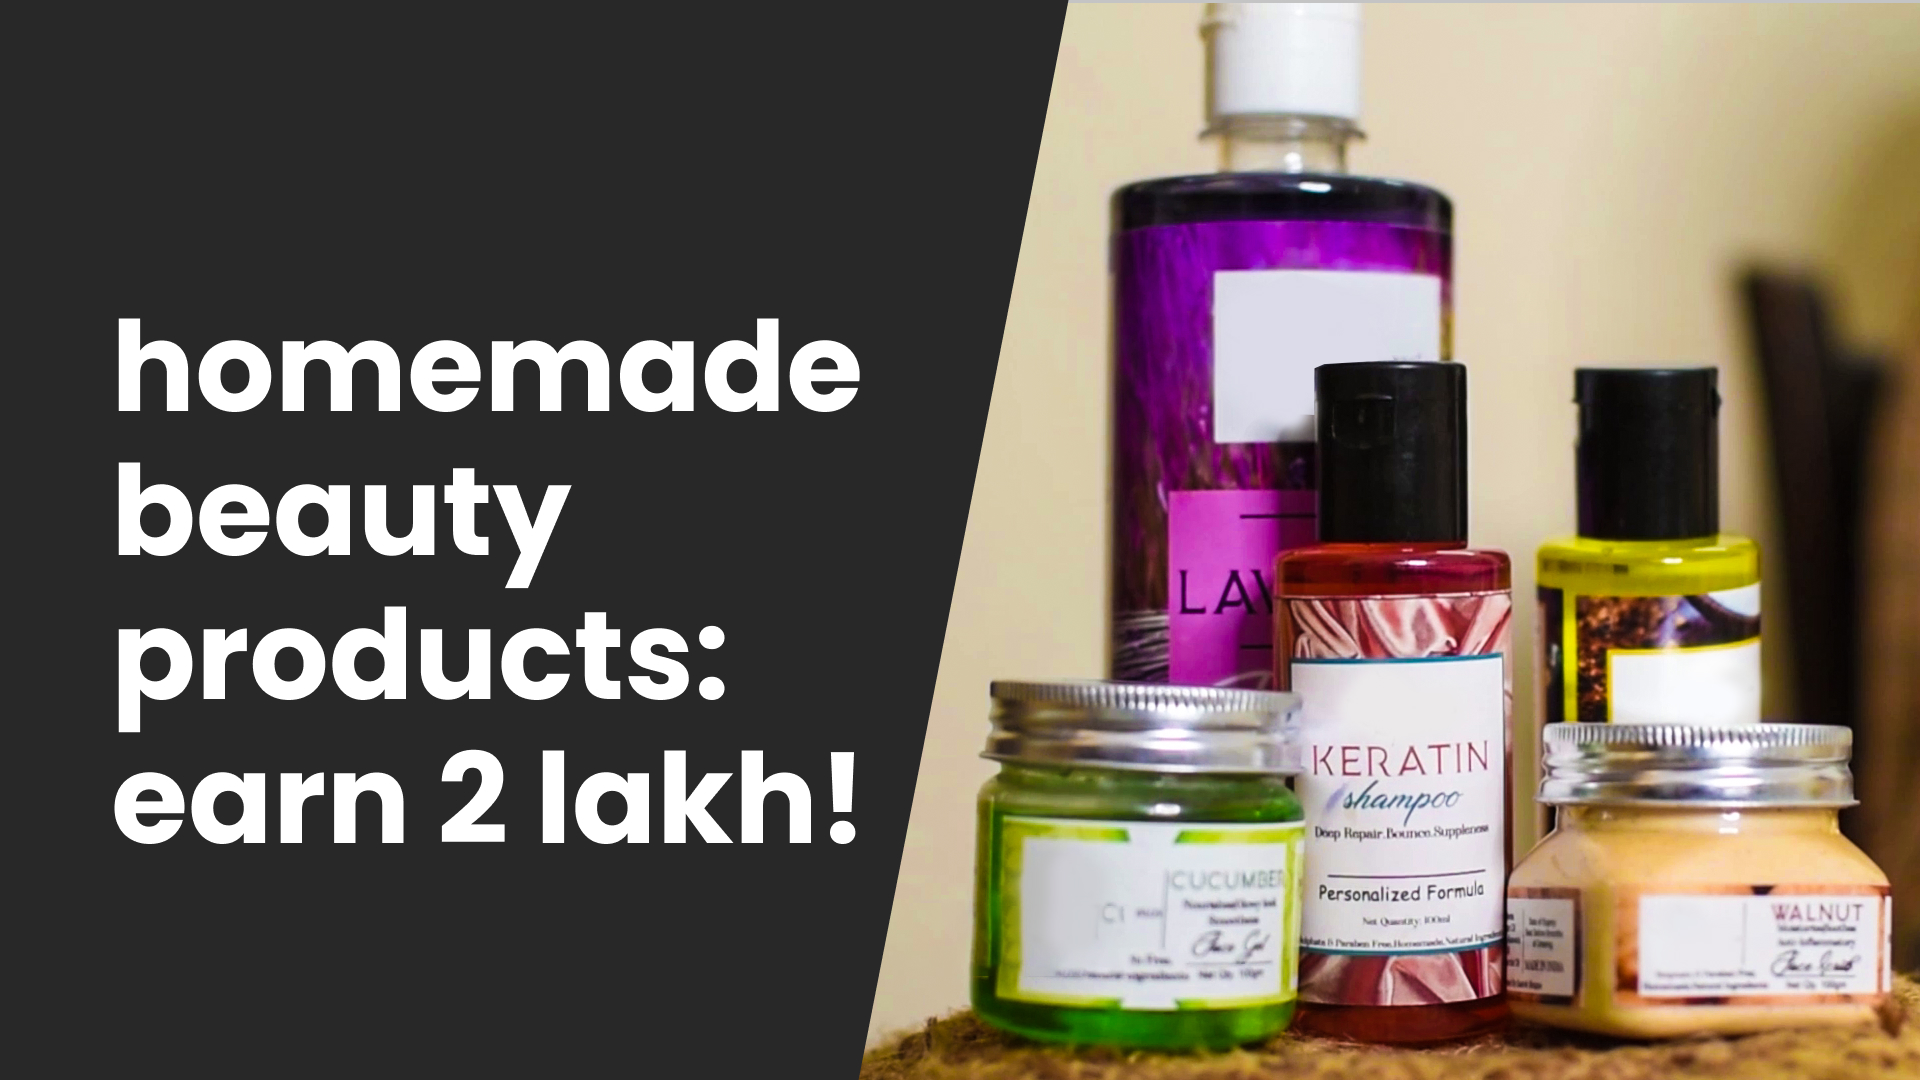 Home Made Beauty Products business video